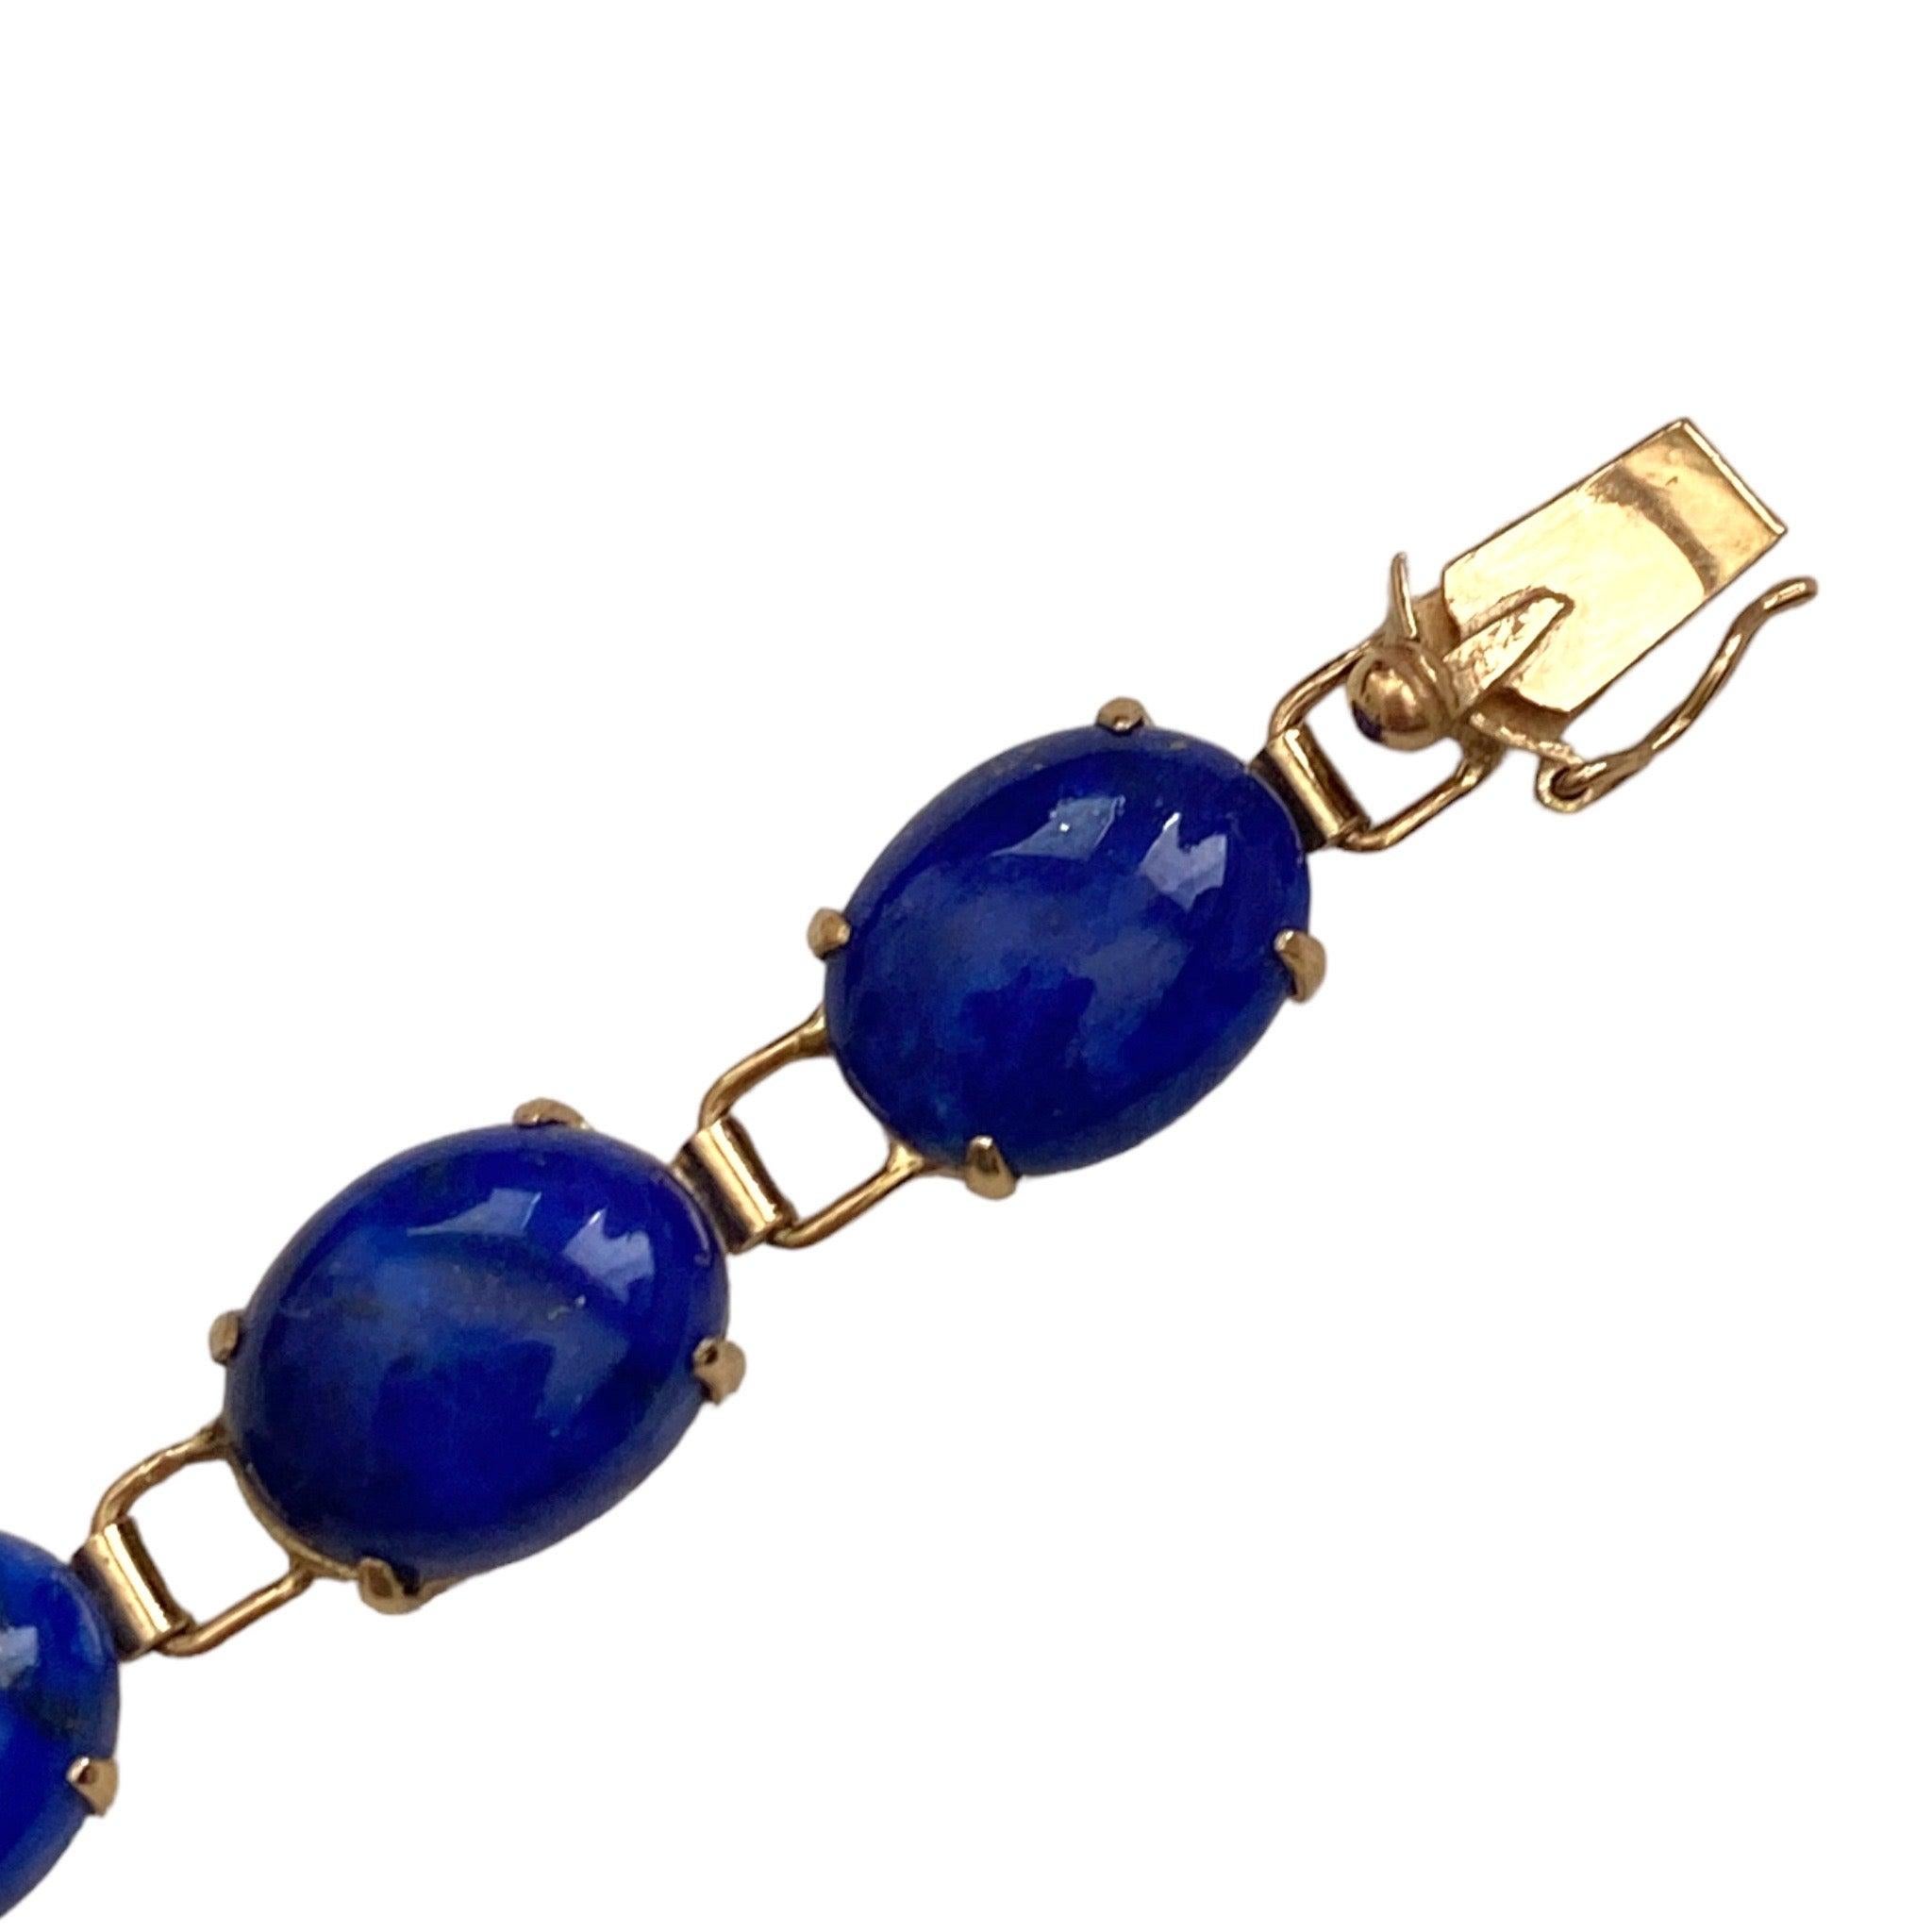 Crafted in 14K yellow gold, the bracelet is composed of fourteen in-line oval cabochon cut lapis lazuli solitaires. Each stone measures an average of 10mm x 8mm. 
Measurements:
Length: 7.25 inches
Width: 8 mm
Weight: 10.8 grams
Marked: 14K 585